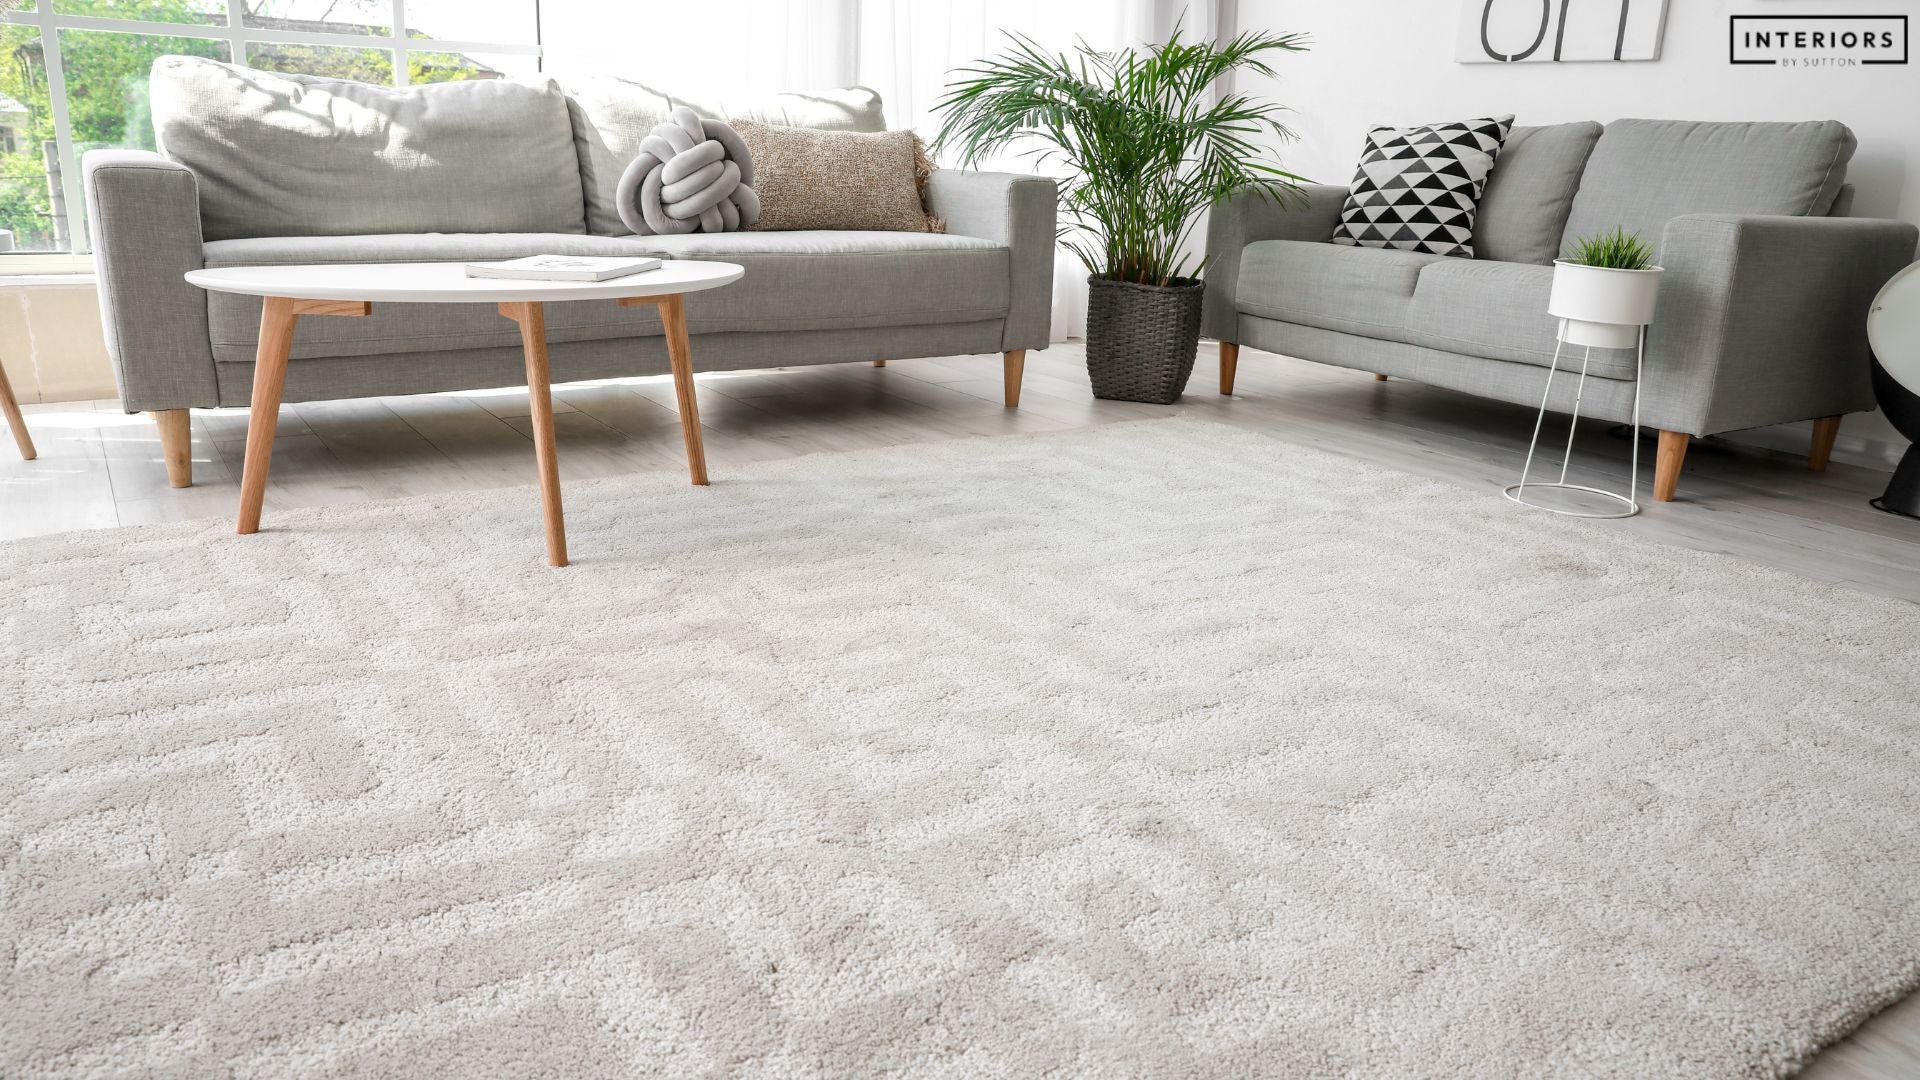 Quality Interior Carpets: Traverse The Realm Of Luxury Home Decor